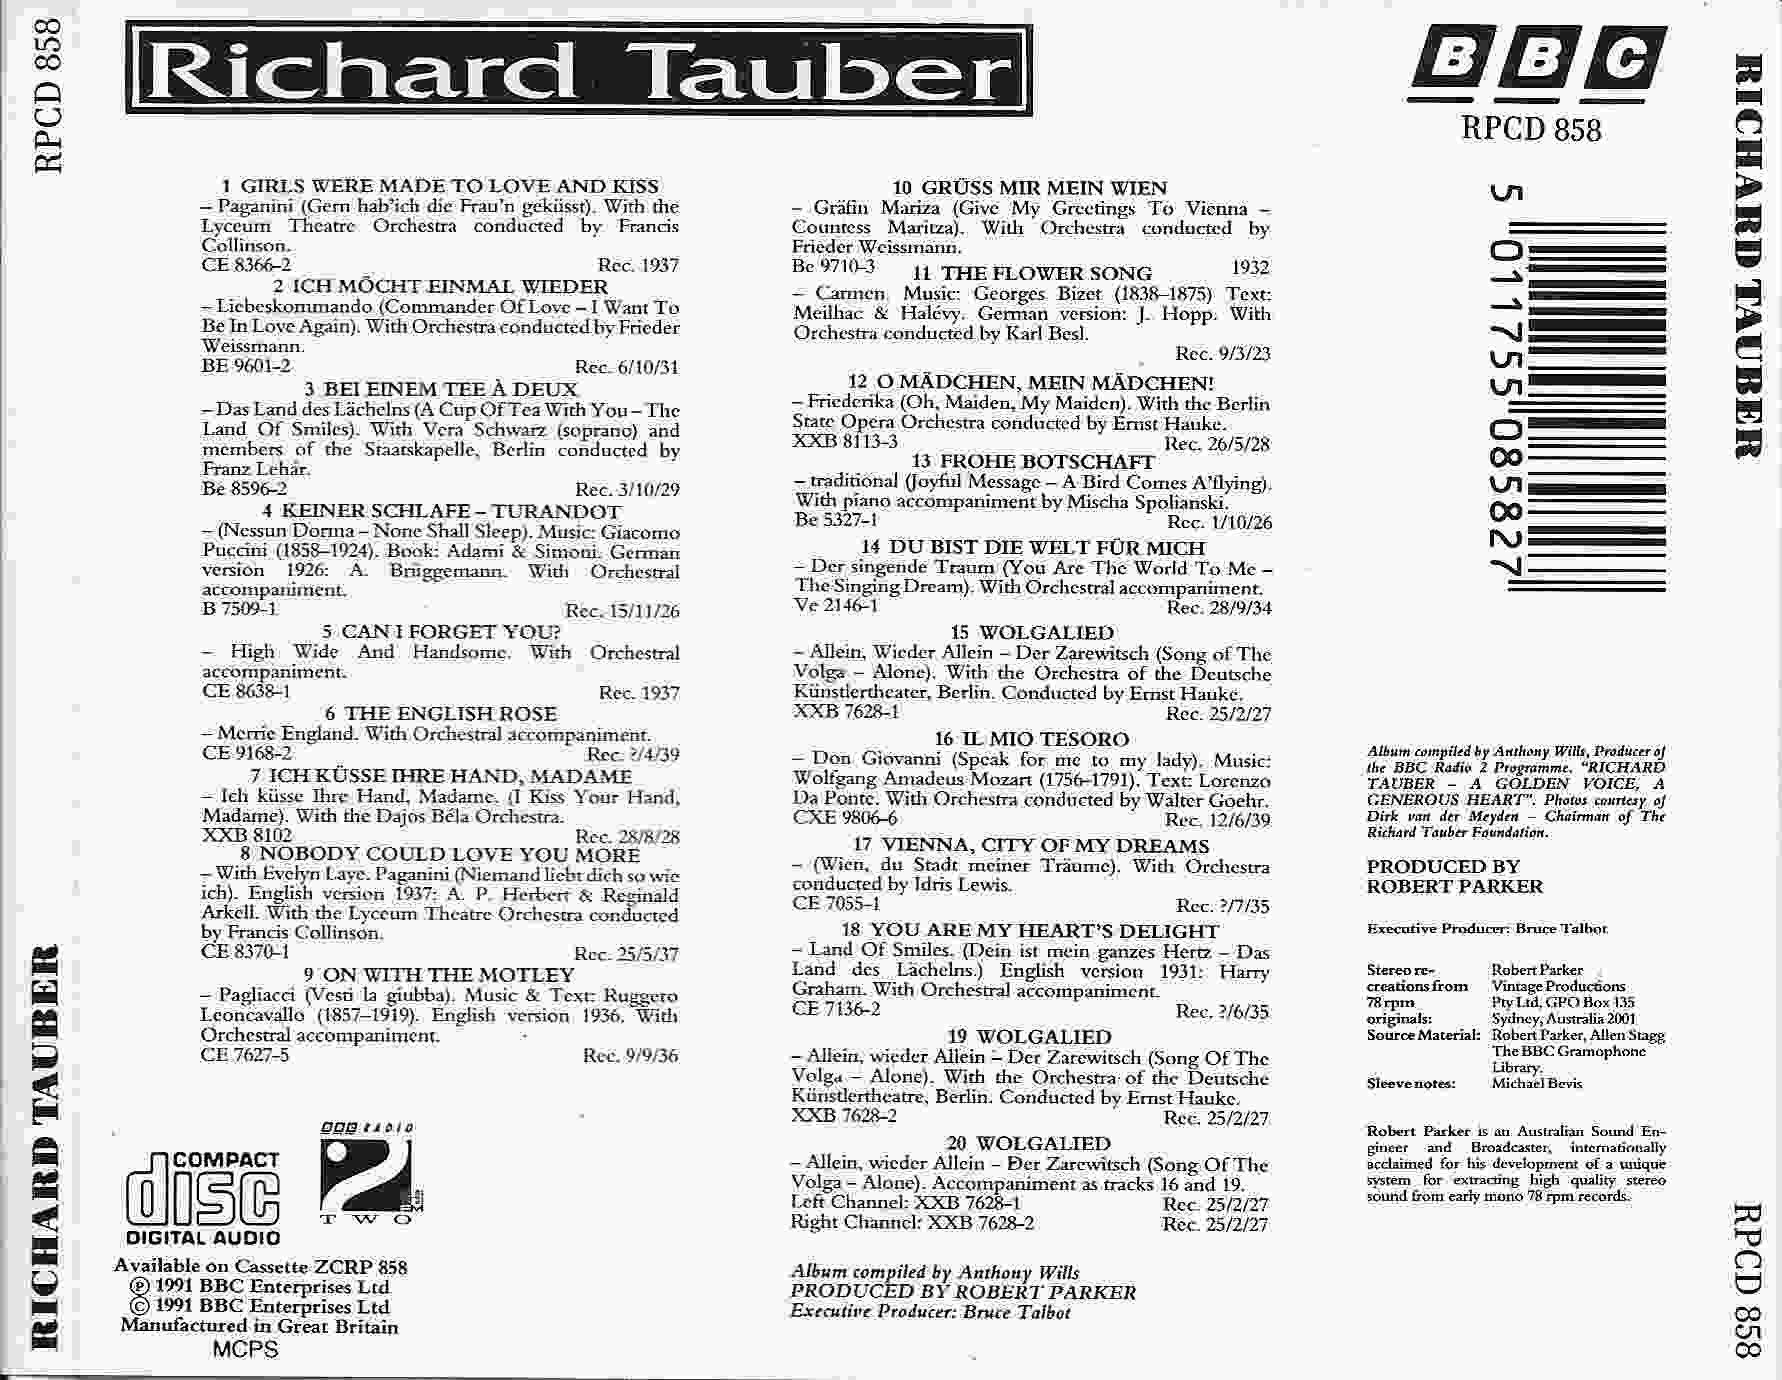 Picture of RPCD 858 Richard Tauber  A selection of his greatest recordings by artist Richard Tauber from the BBC records and Tapes library